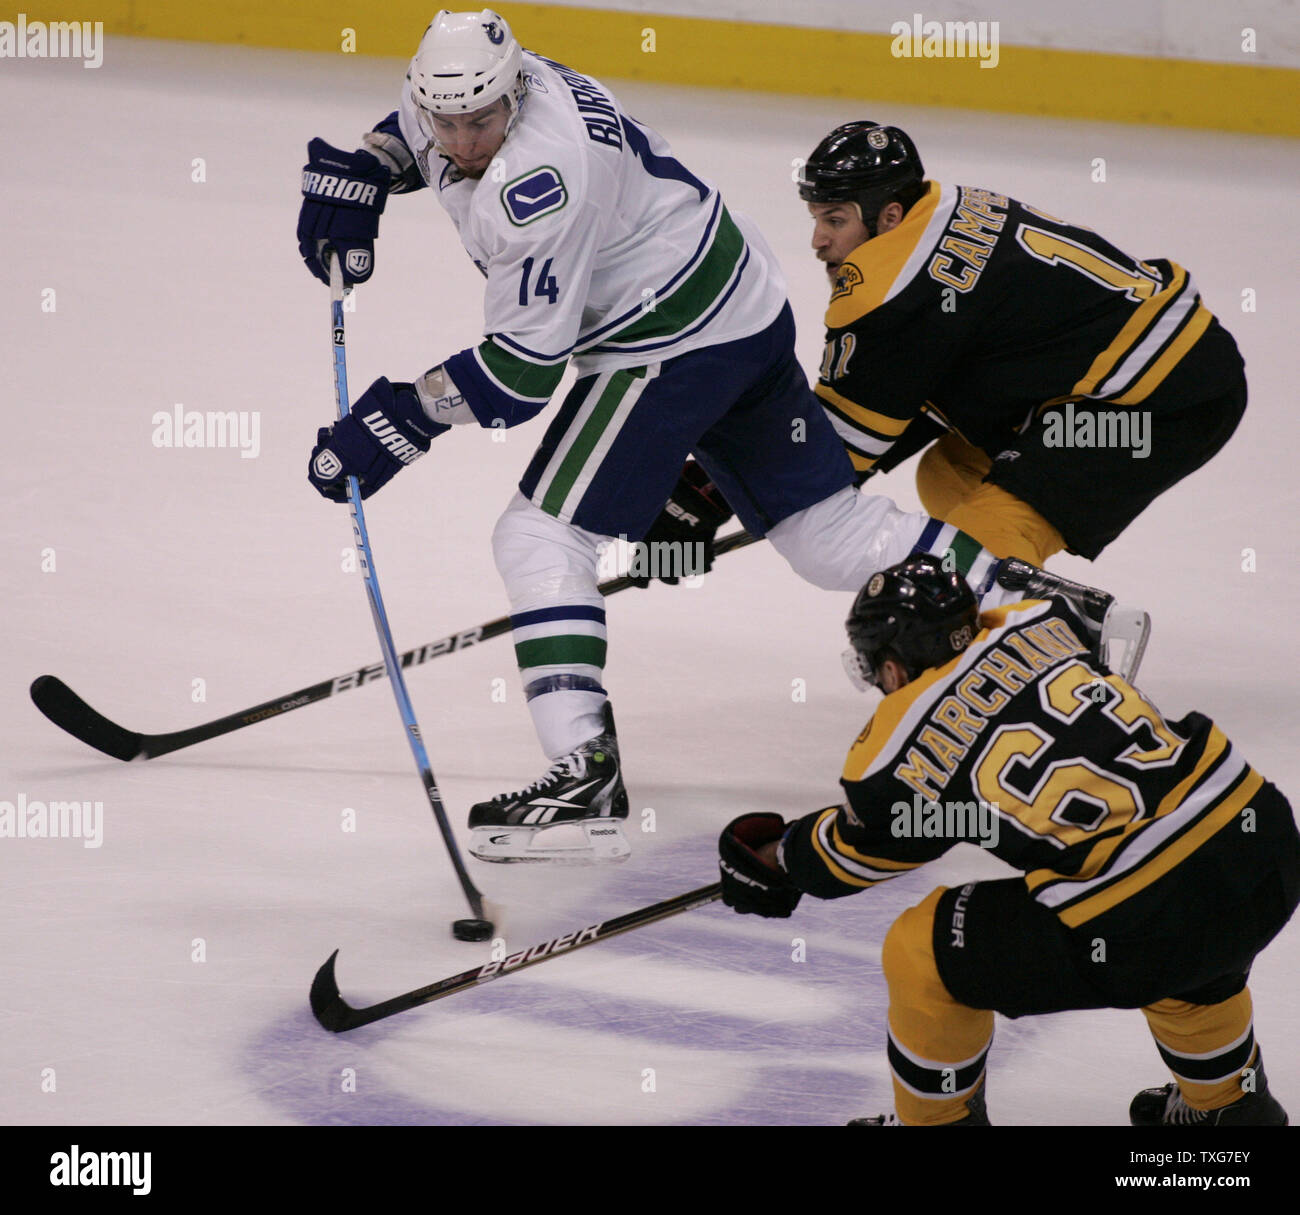 Bergeron, Bruins beat Canucks 5-2 for 11th win in 12 games